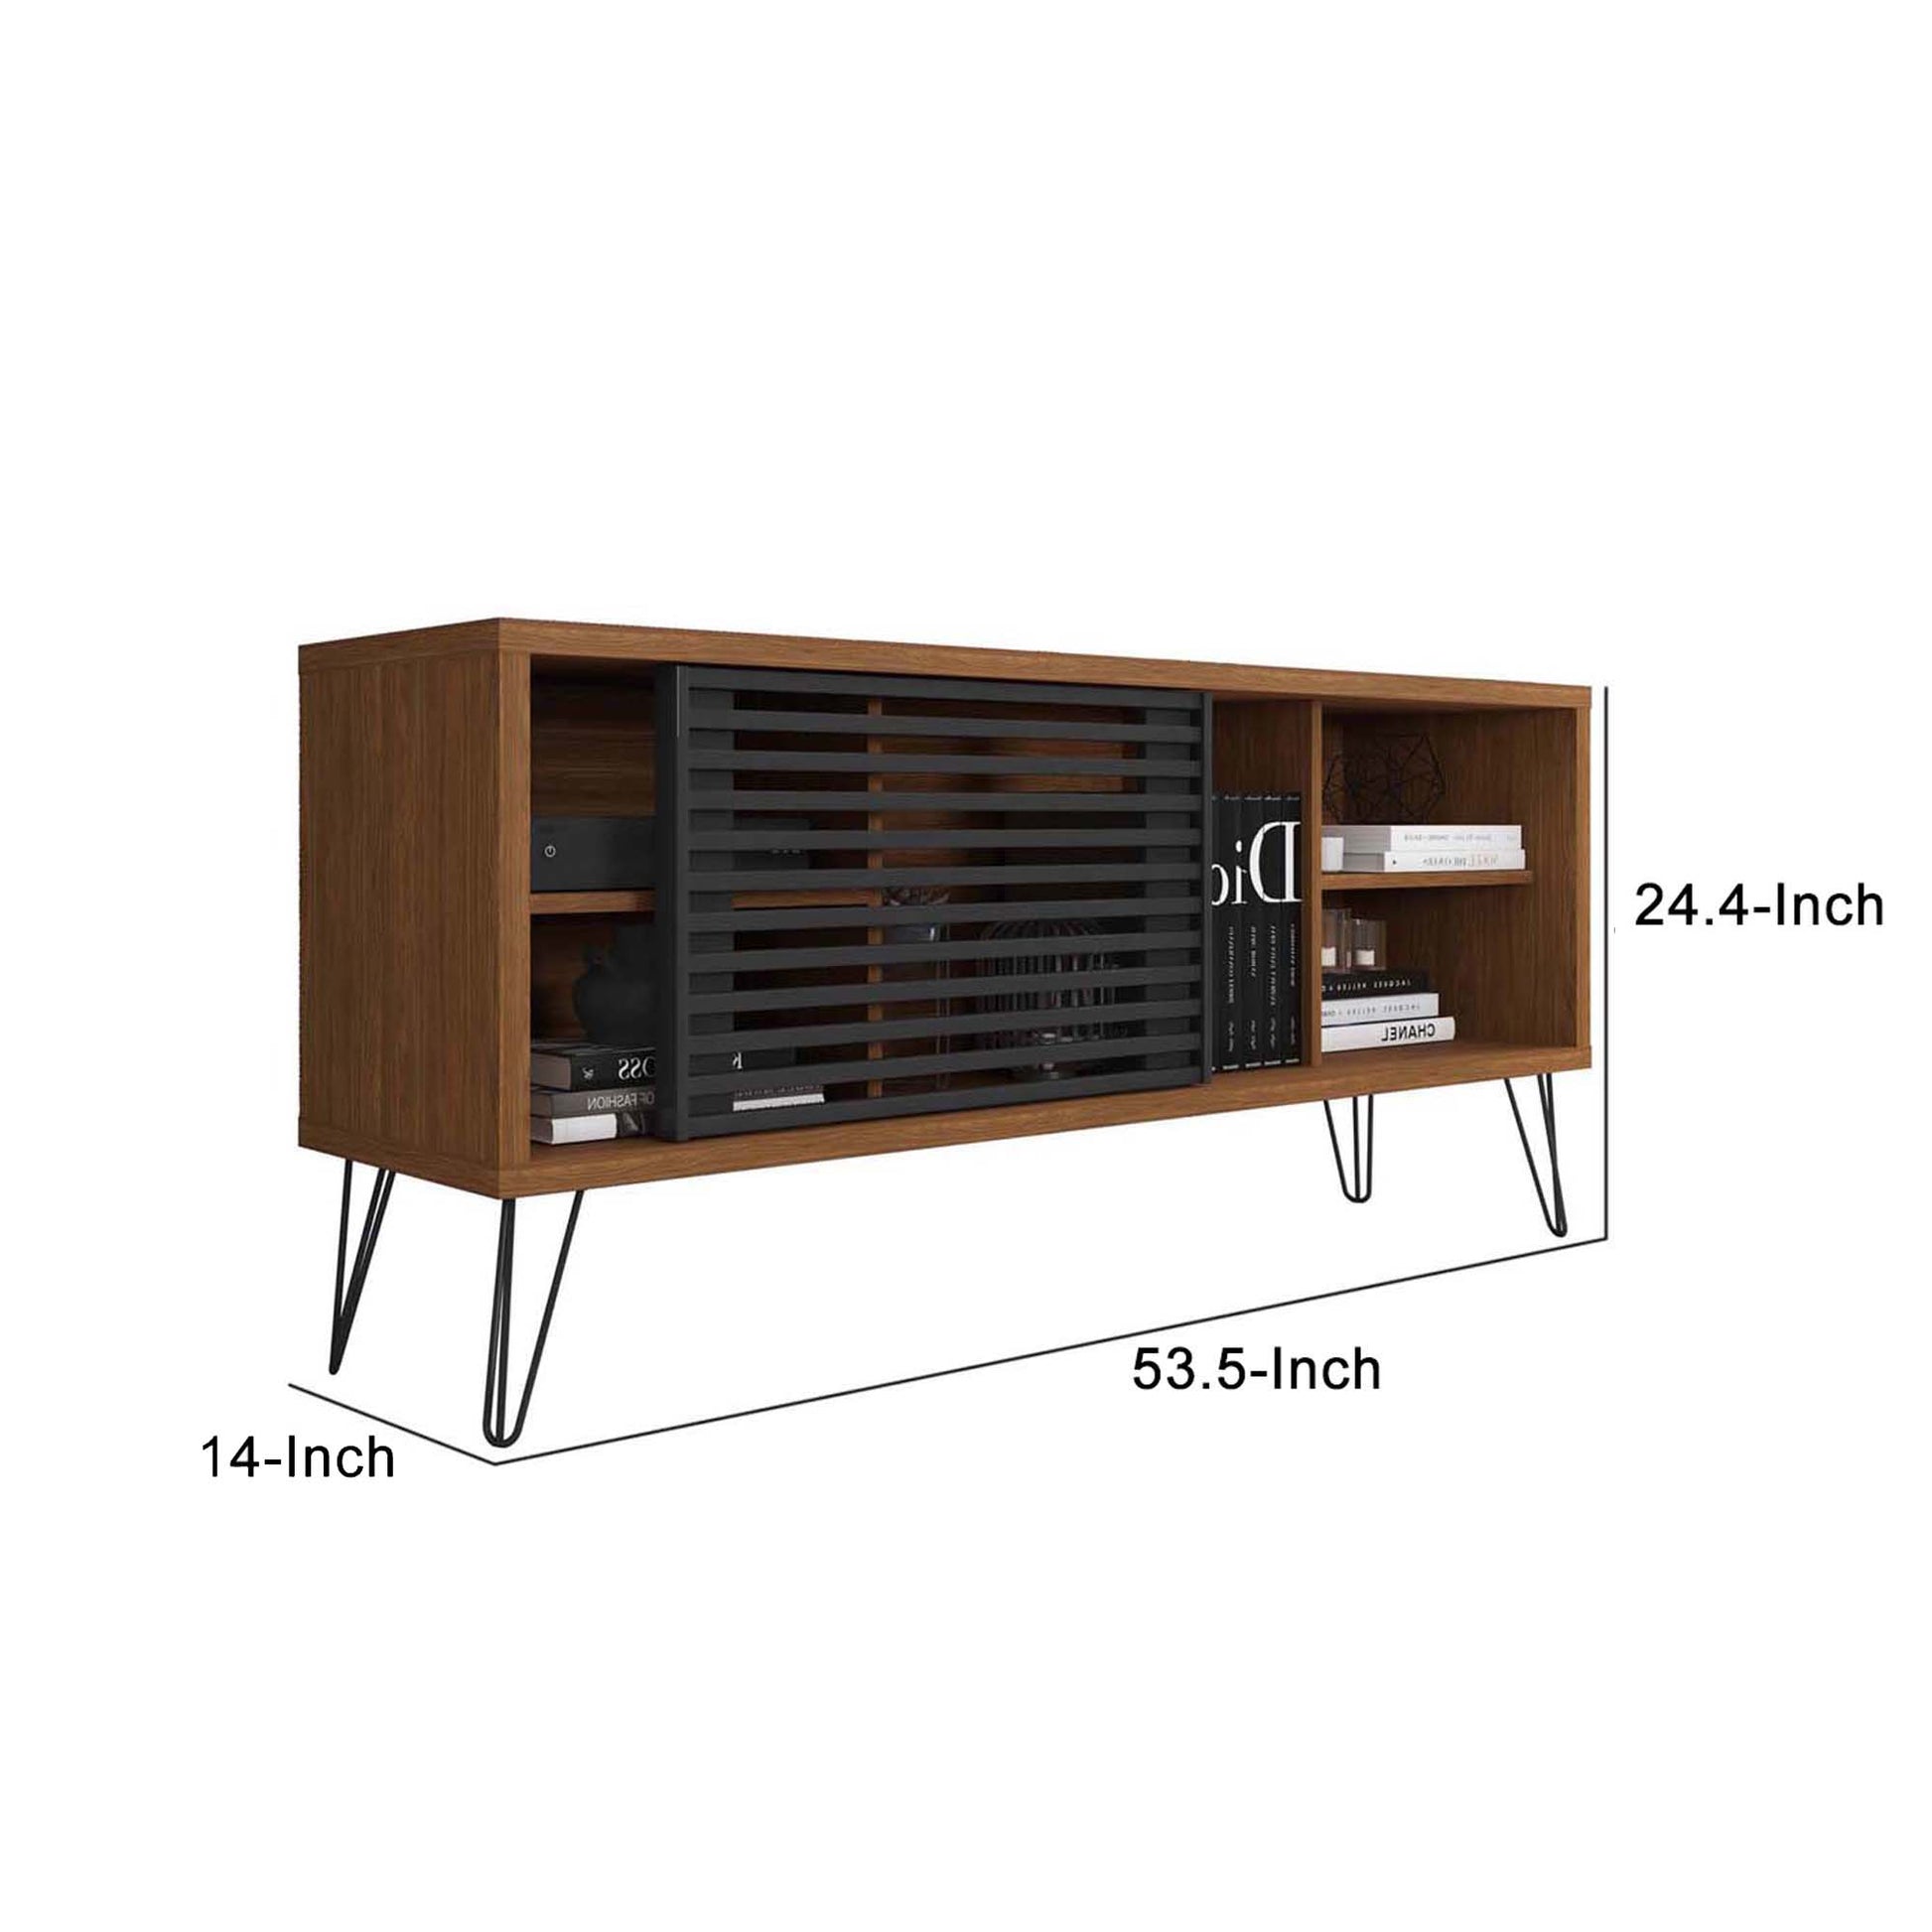 Arthur 54 Inch Wooden TV Stand with 1 Sliding Door Walnut Brown and Black By The Urban Port UPT-271305